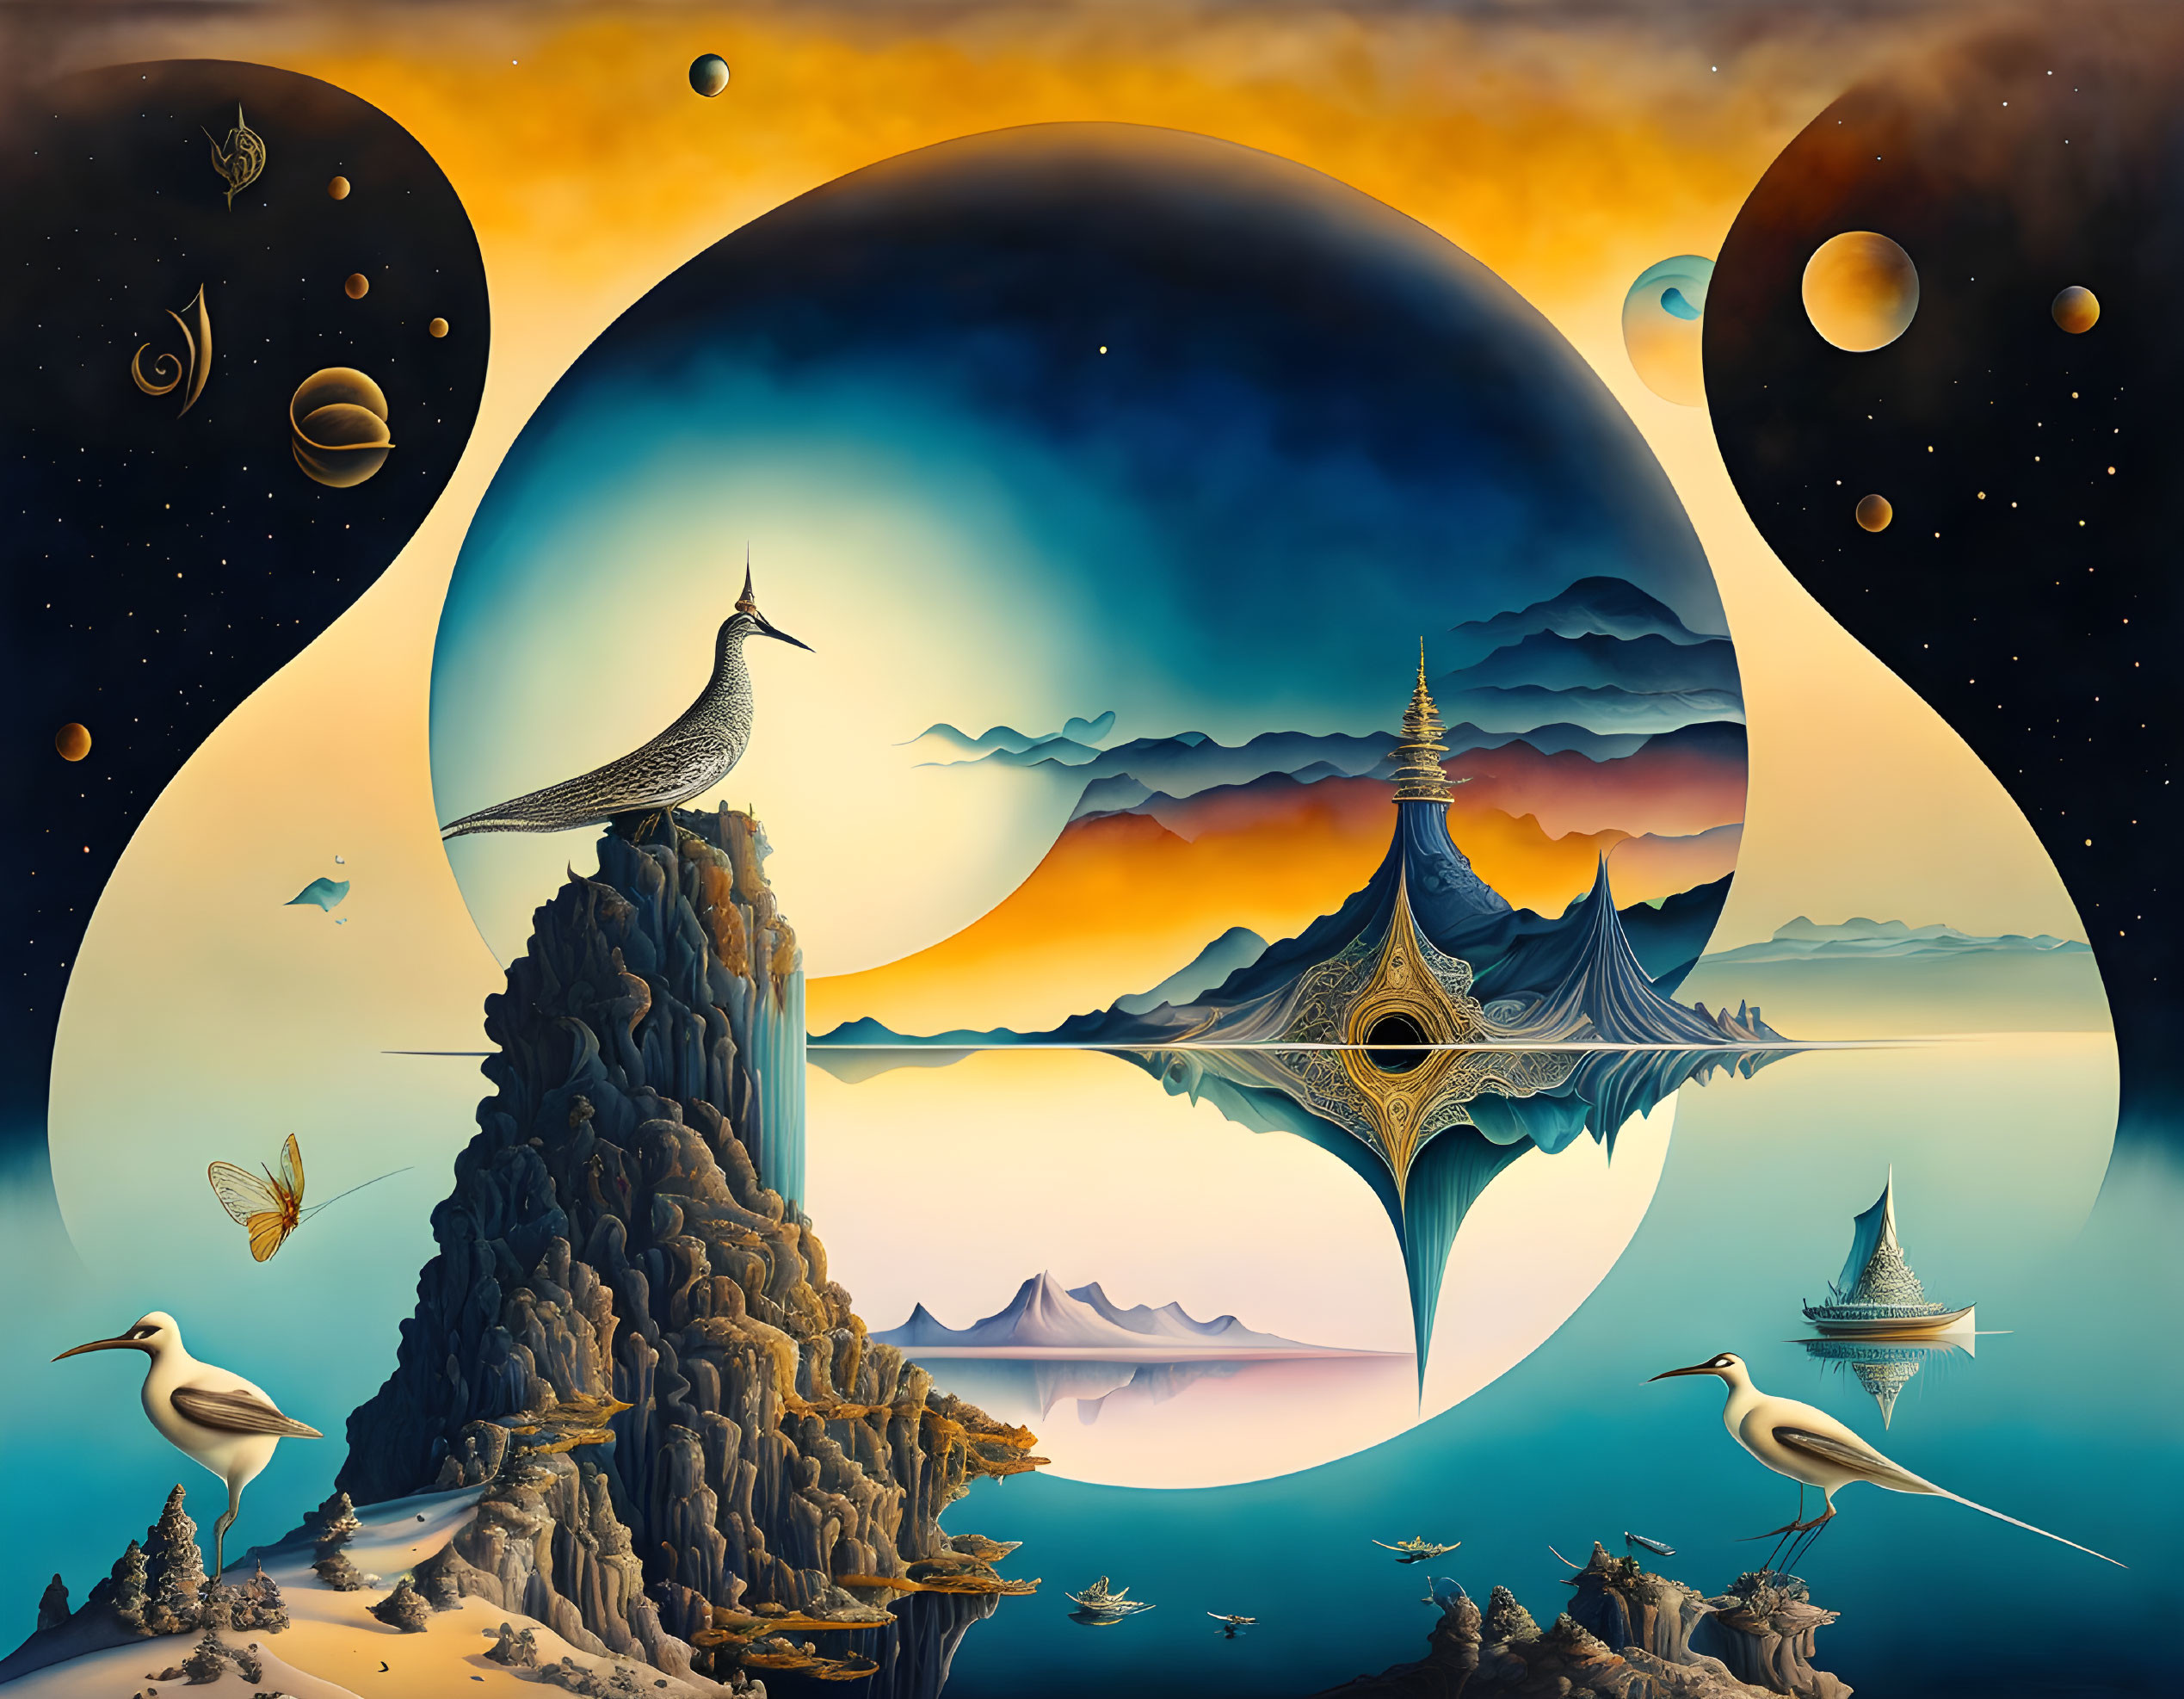 Fantastical landscape blending day and night with surreal elements, birds, planets, yin-yang